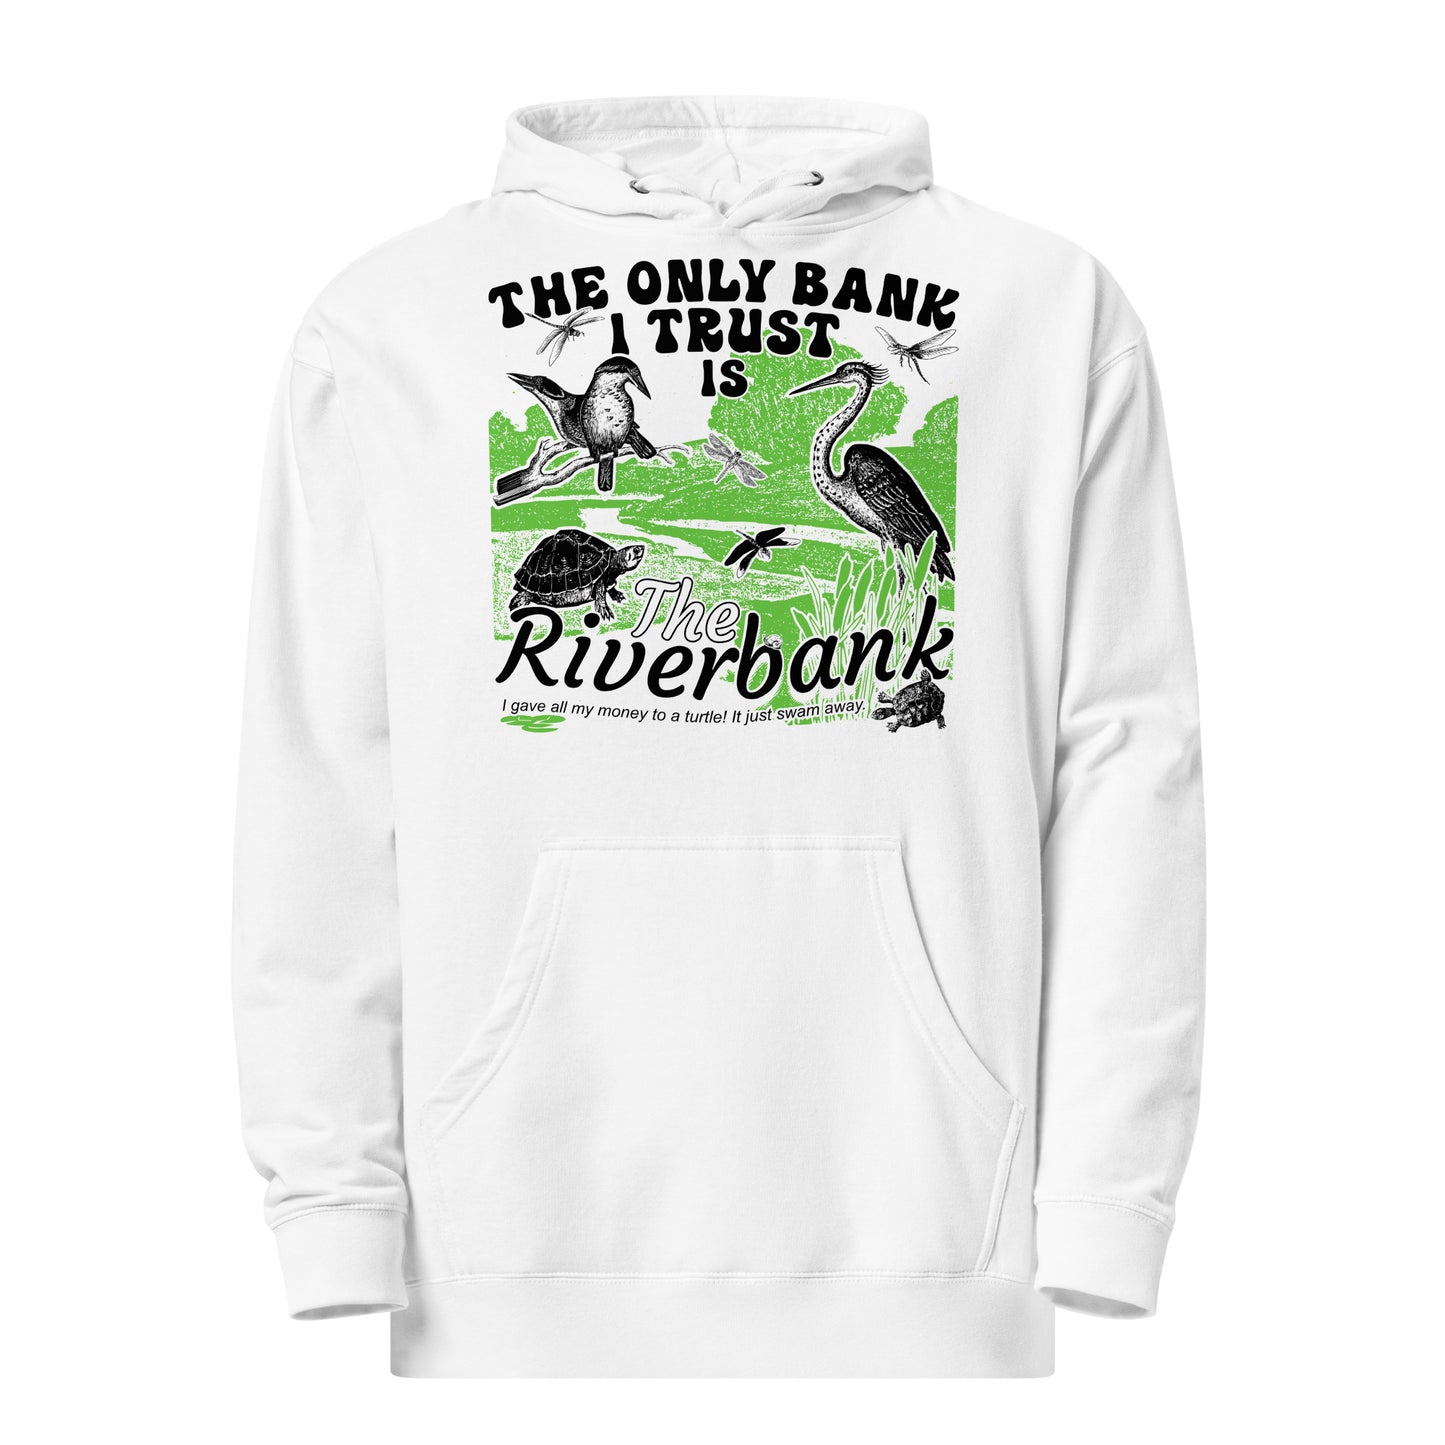 "The Riverbank" Unisex midweight hoodie